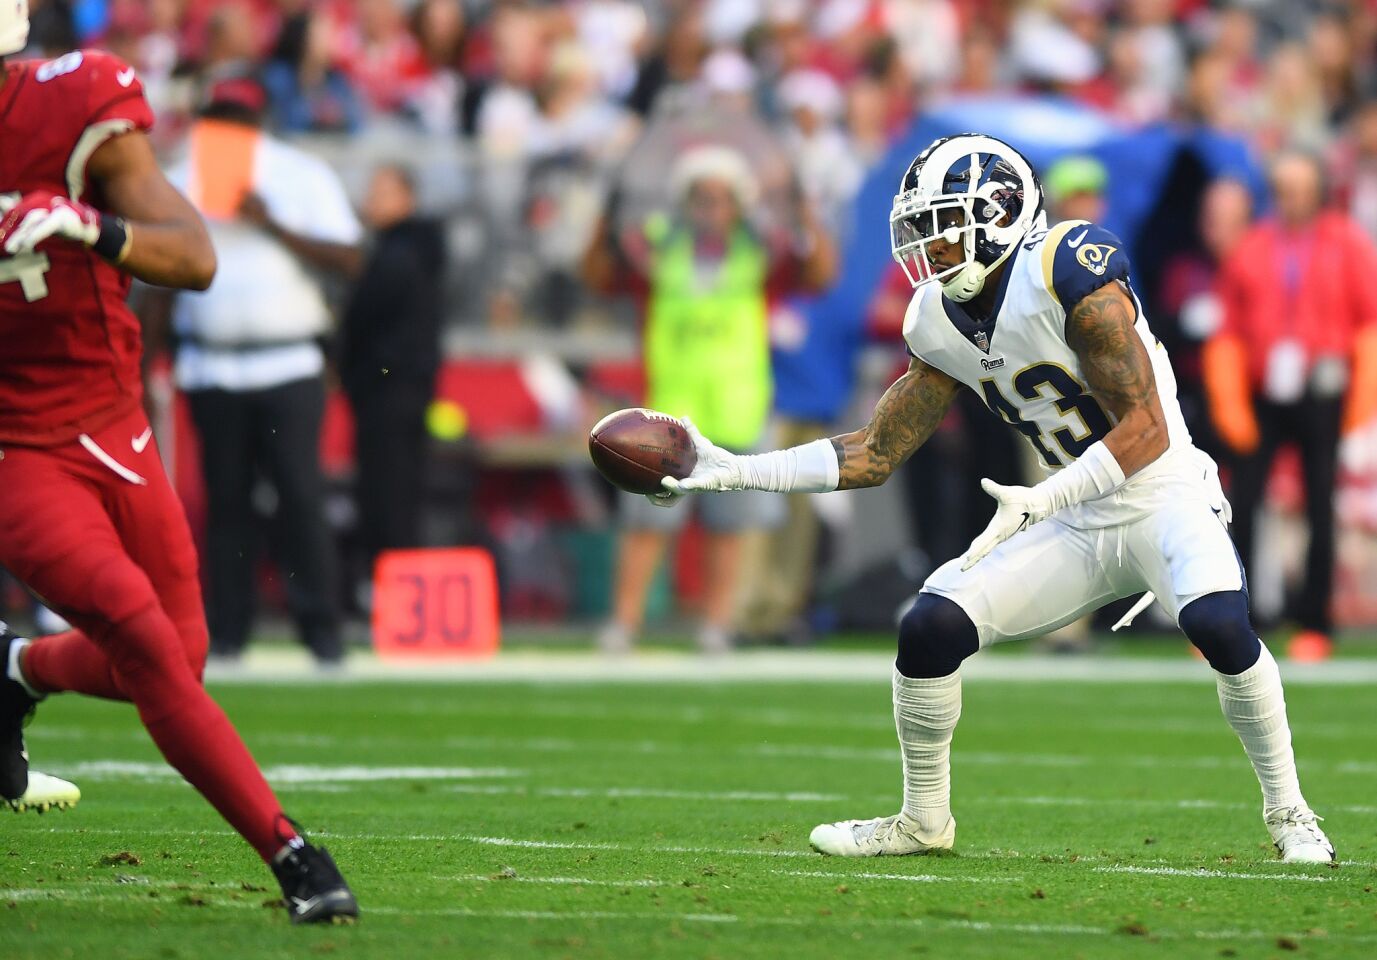 Rams safety John Johnson almost comes up with an interception against the Arizona Cardinals in the second quarter at State Farm Stadium on Sunday.